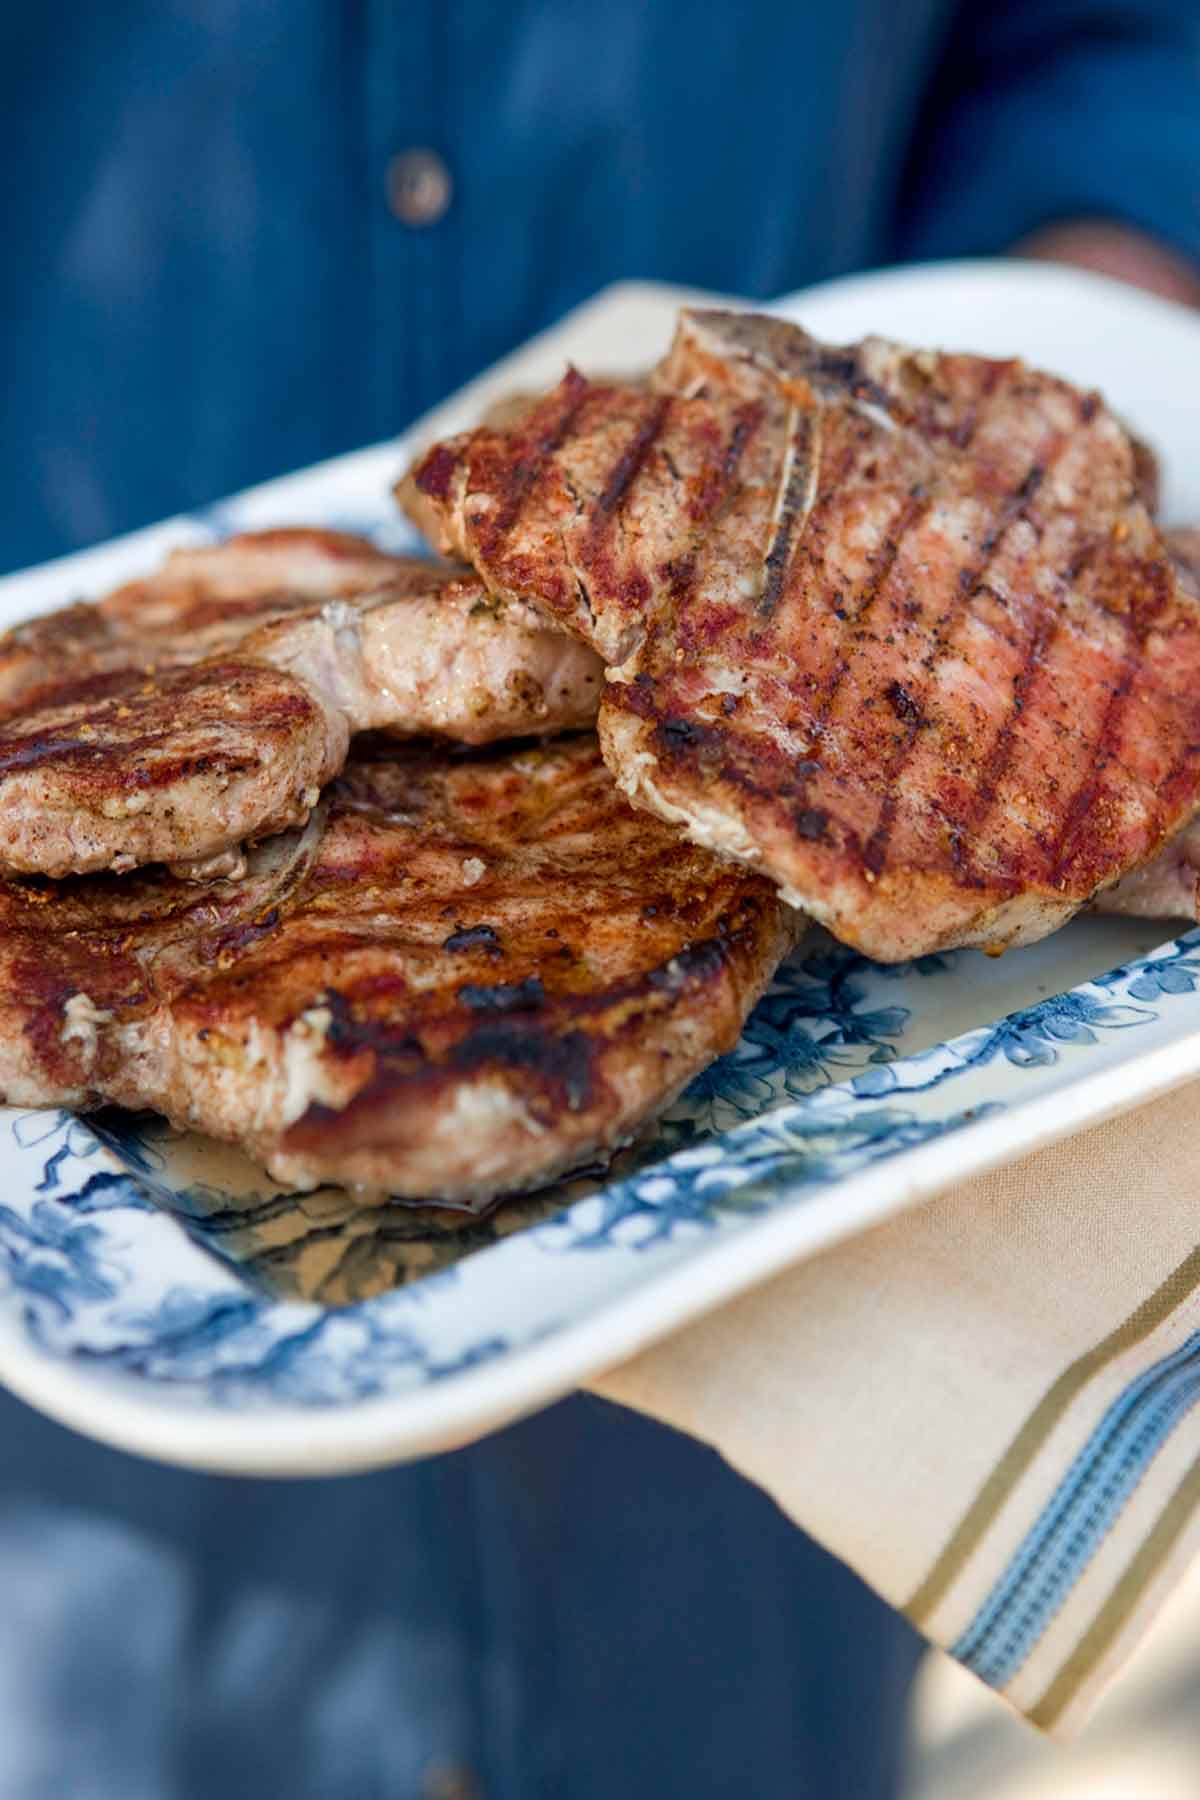 A person carrying a decorative blue and white serving platter loaded with five-spice grilled pork chops.